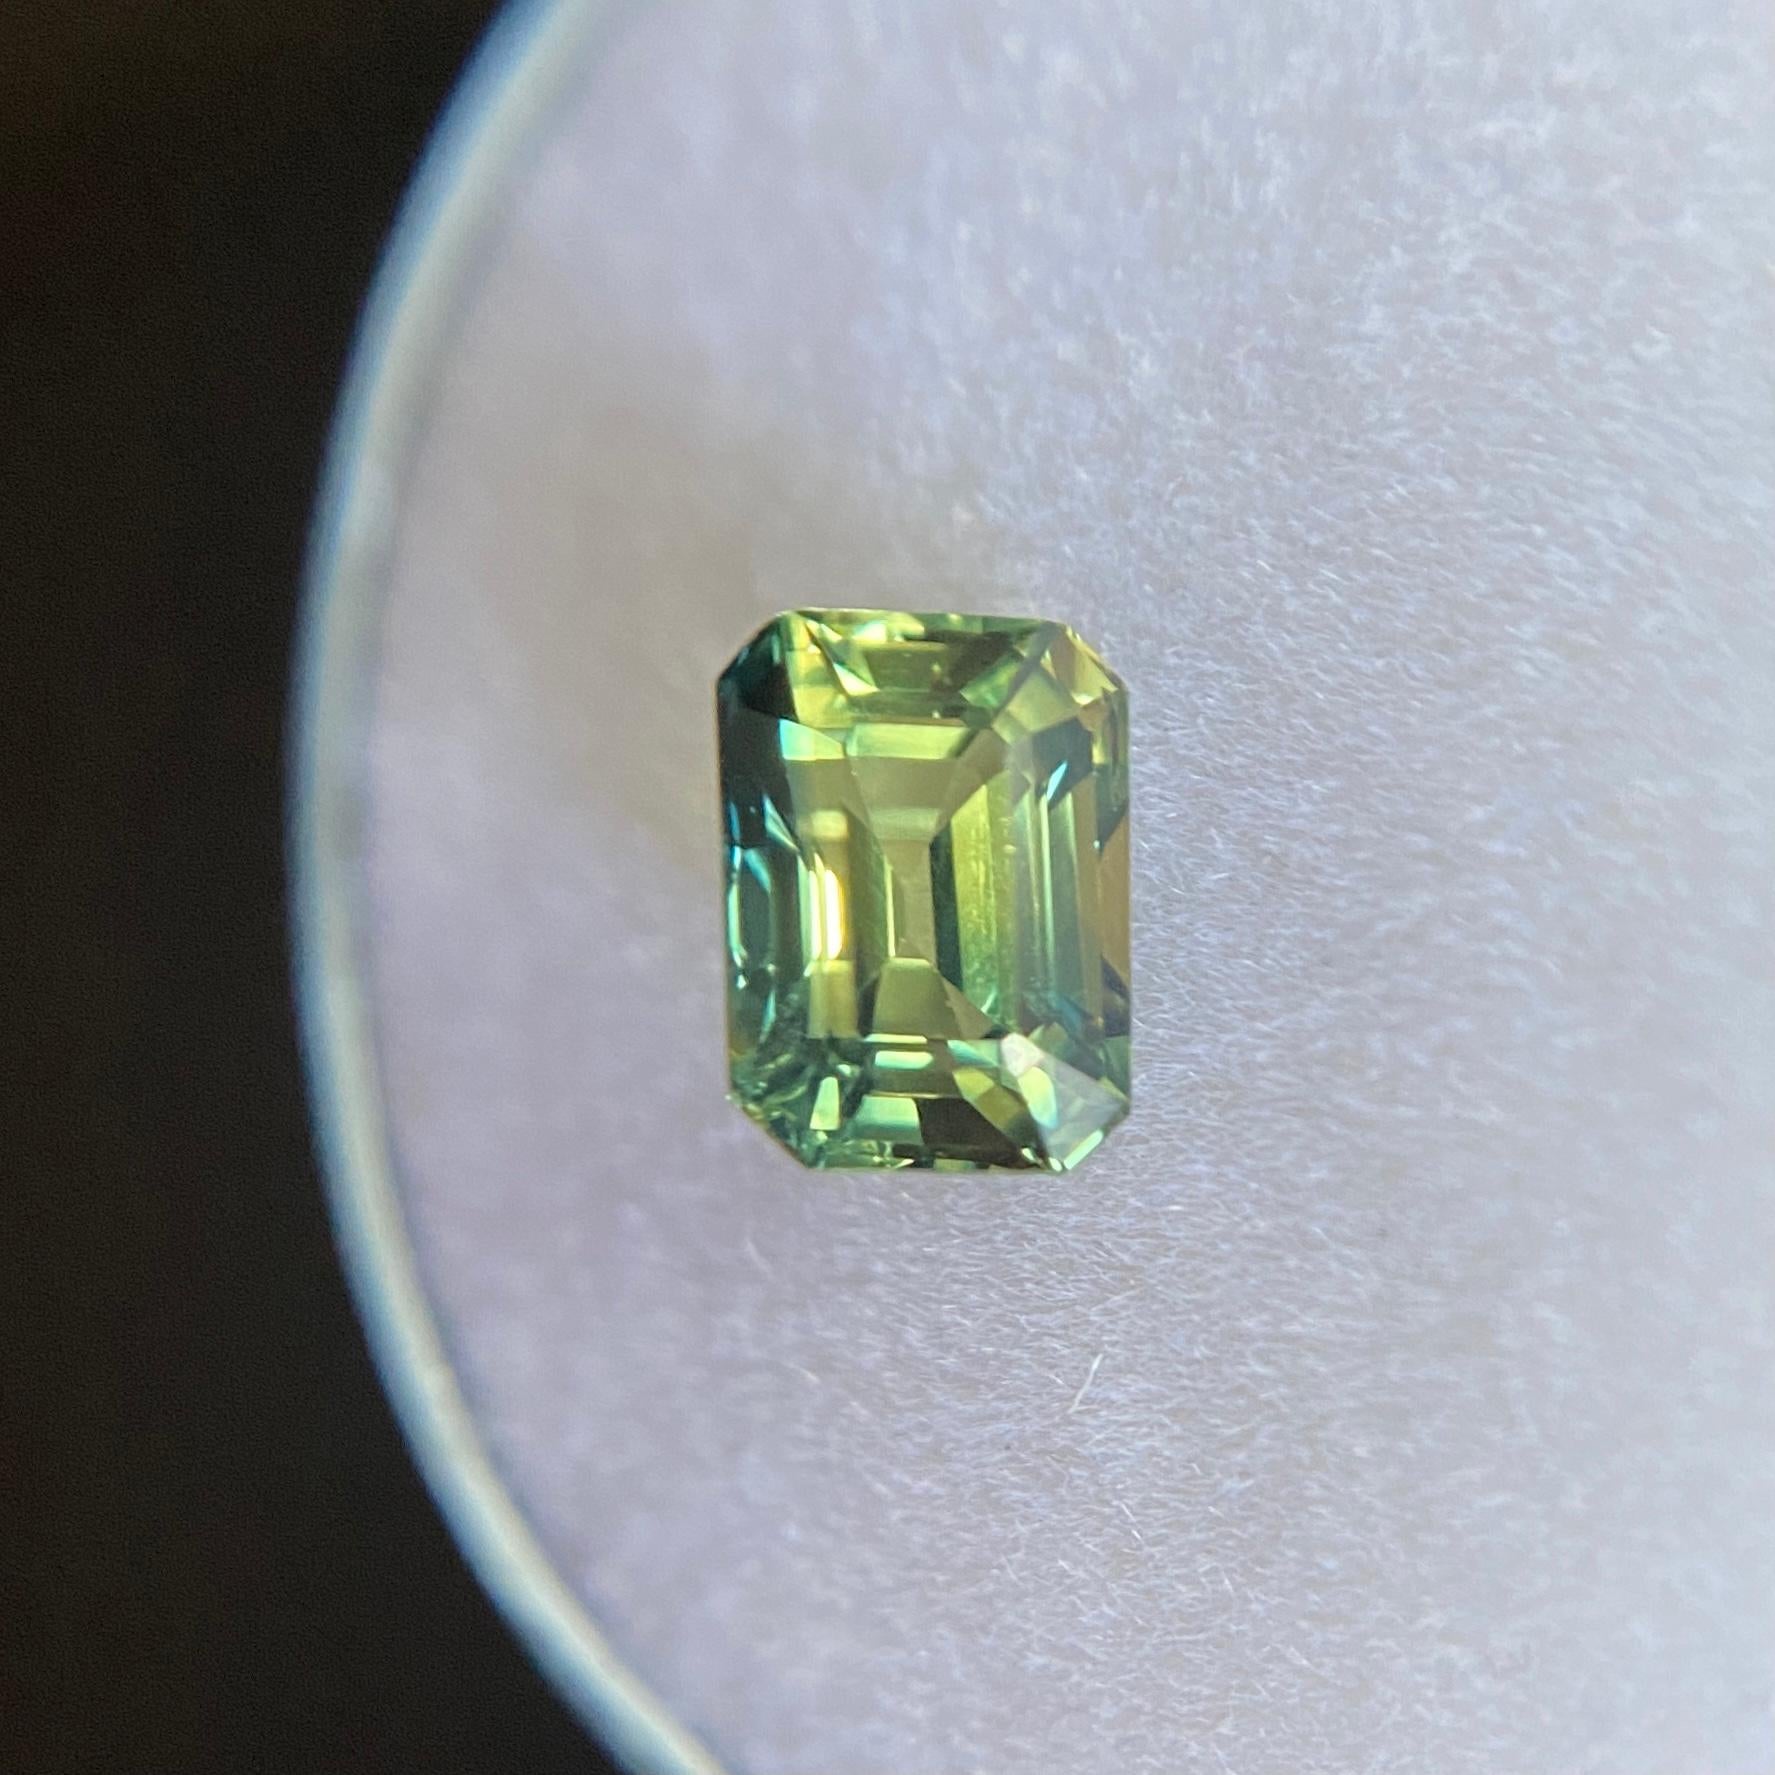 Rare Untreated Thailand Parti Colour Sapphire Gemstone.

1.19 Carat unheated sapphire with a rare parti colour effect. Showing blue and greenish yellow colours. Very rare and stunning to see.

Fully certified by GIA confirming stone as natural,